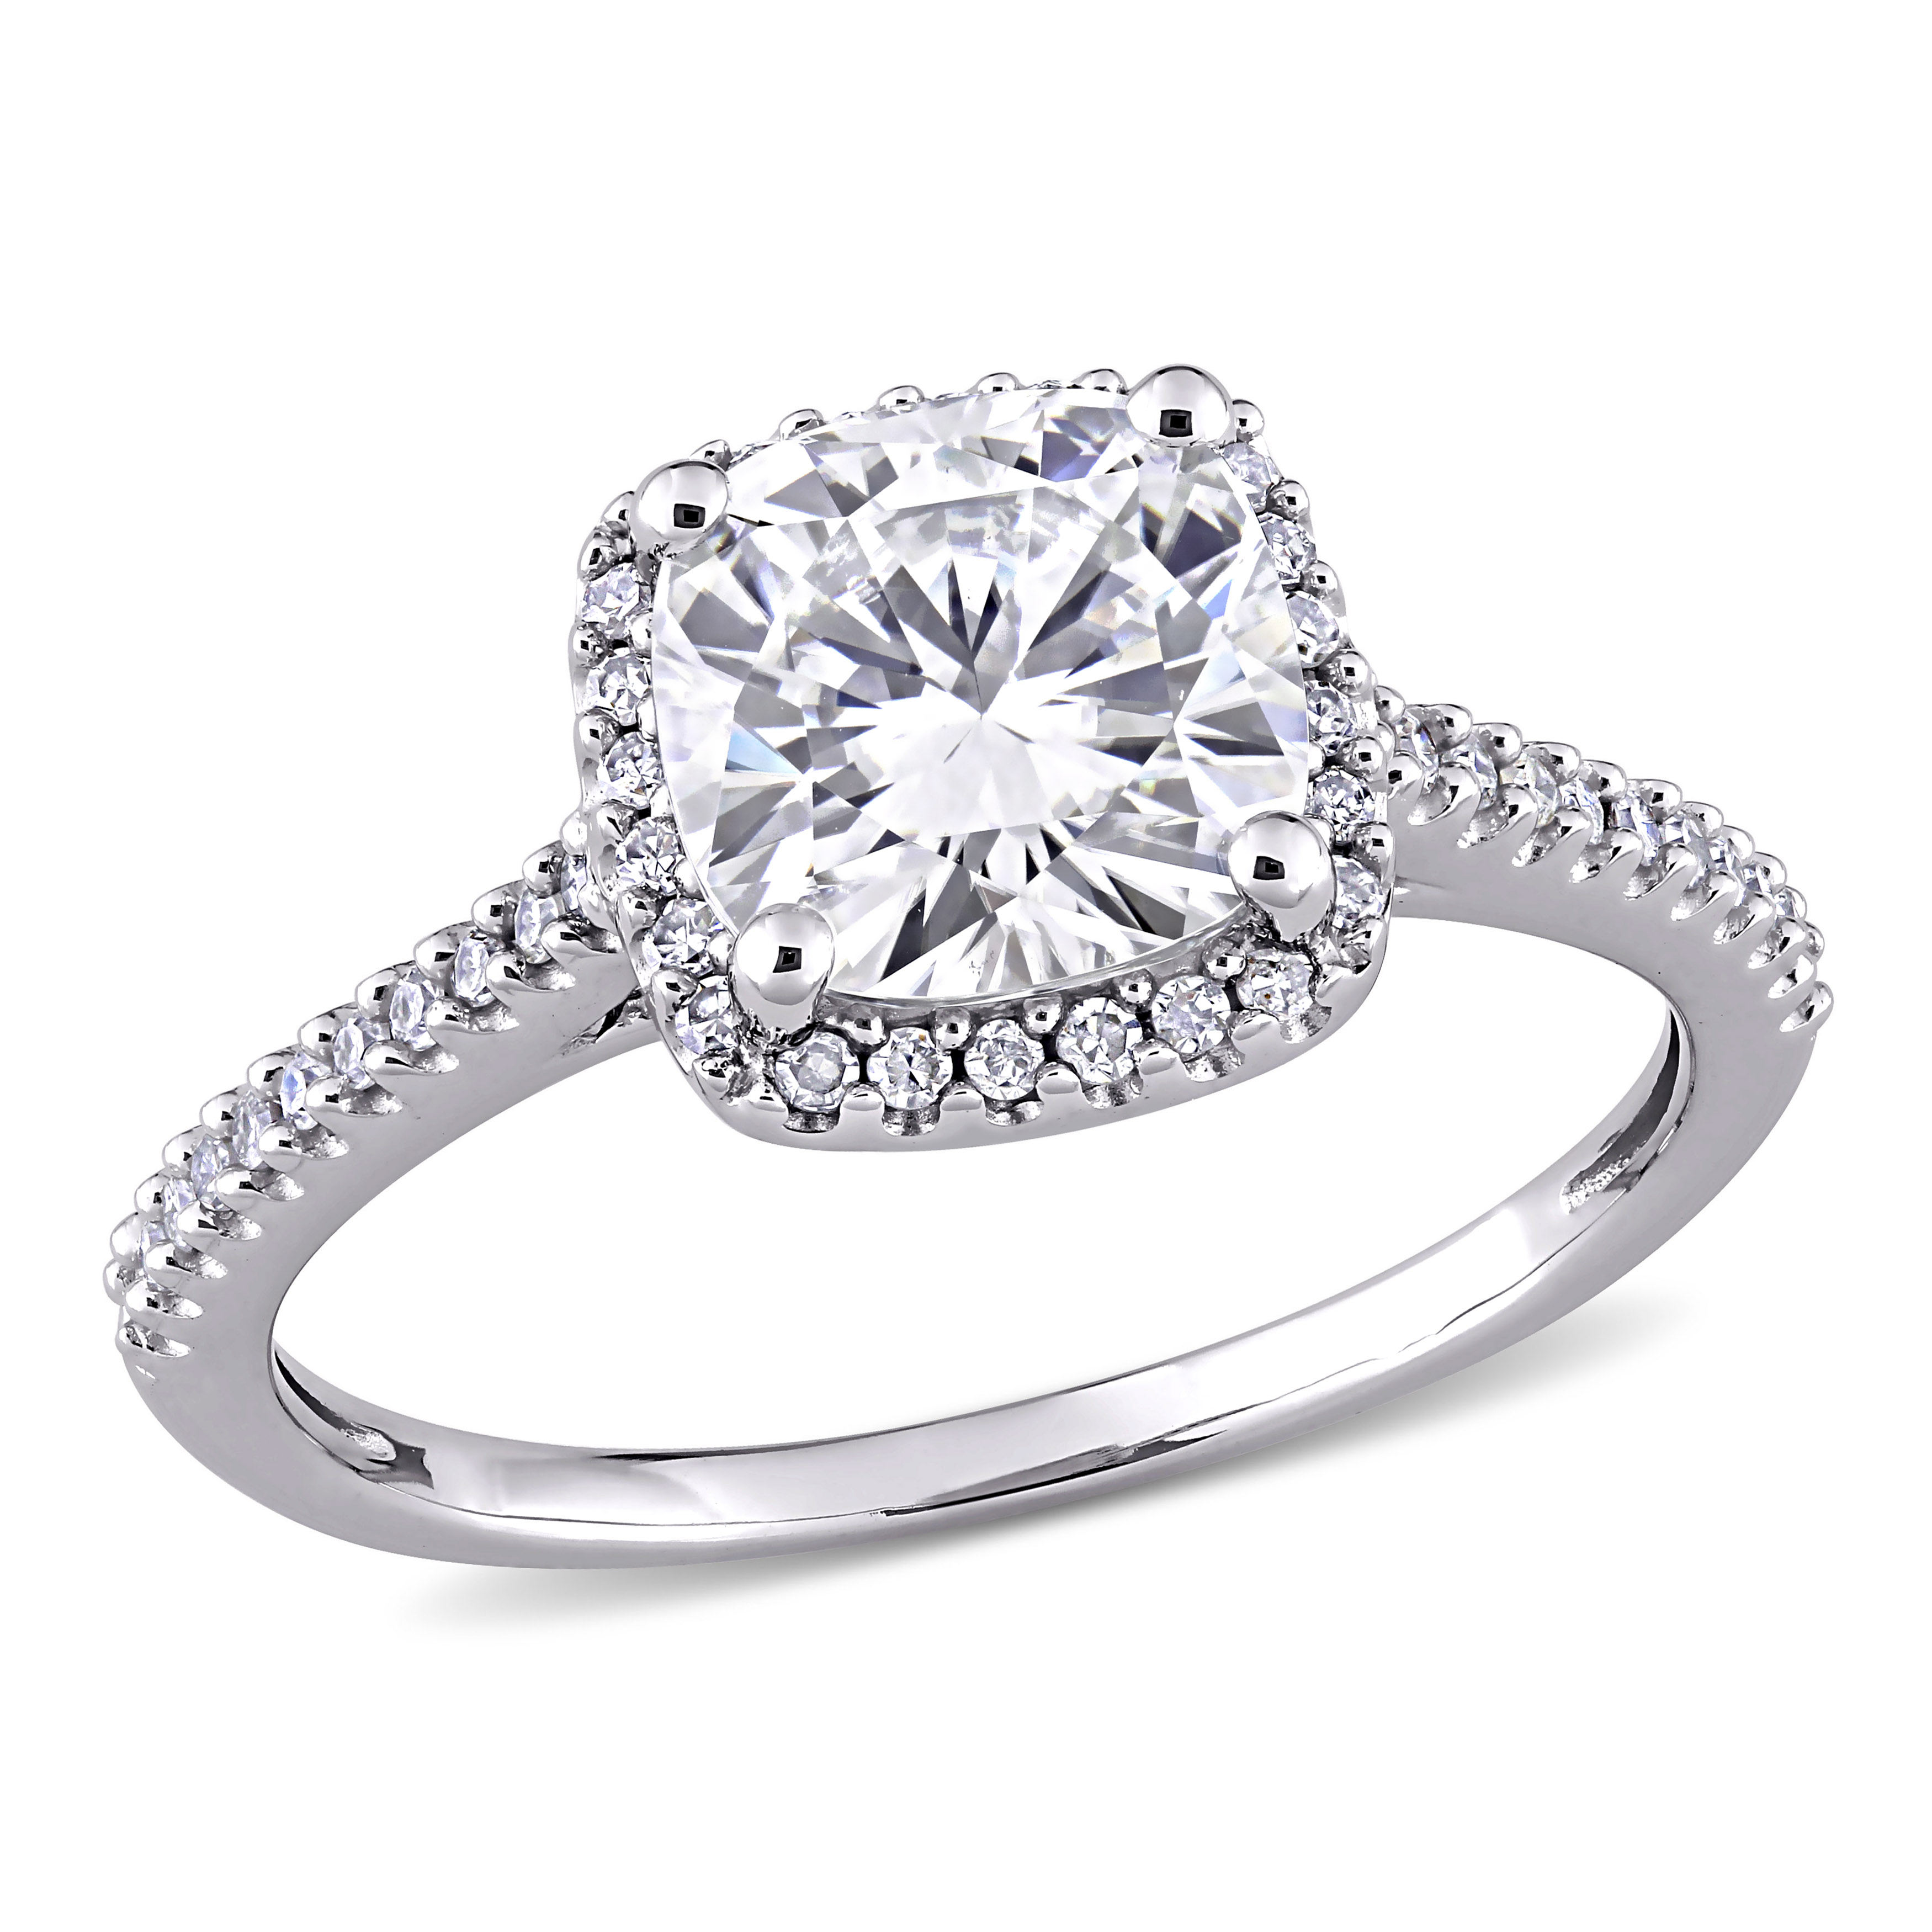 2 CT TGW Cushion Created Moissanite and 1/4 CT TW Diamond Halo Engagement Ring in 14k White Gold